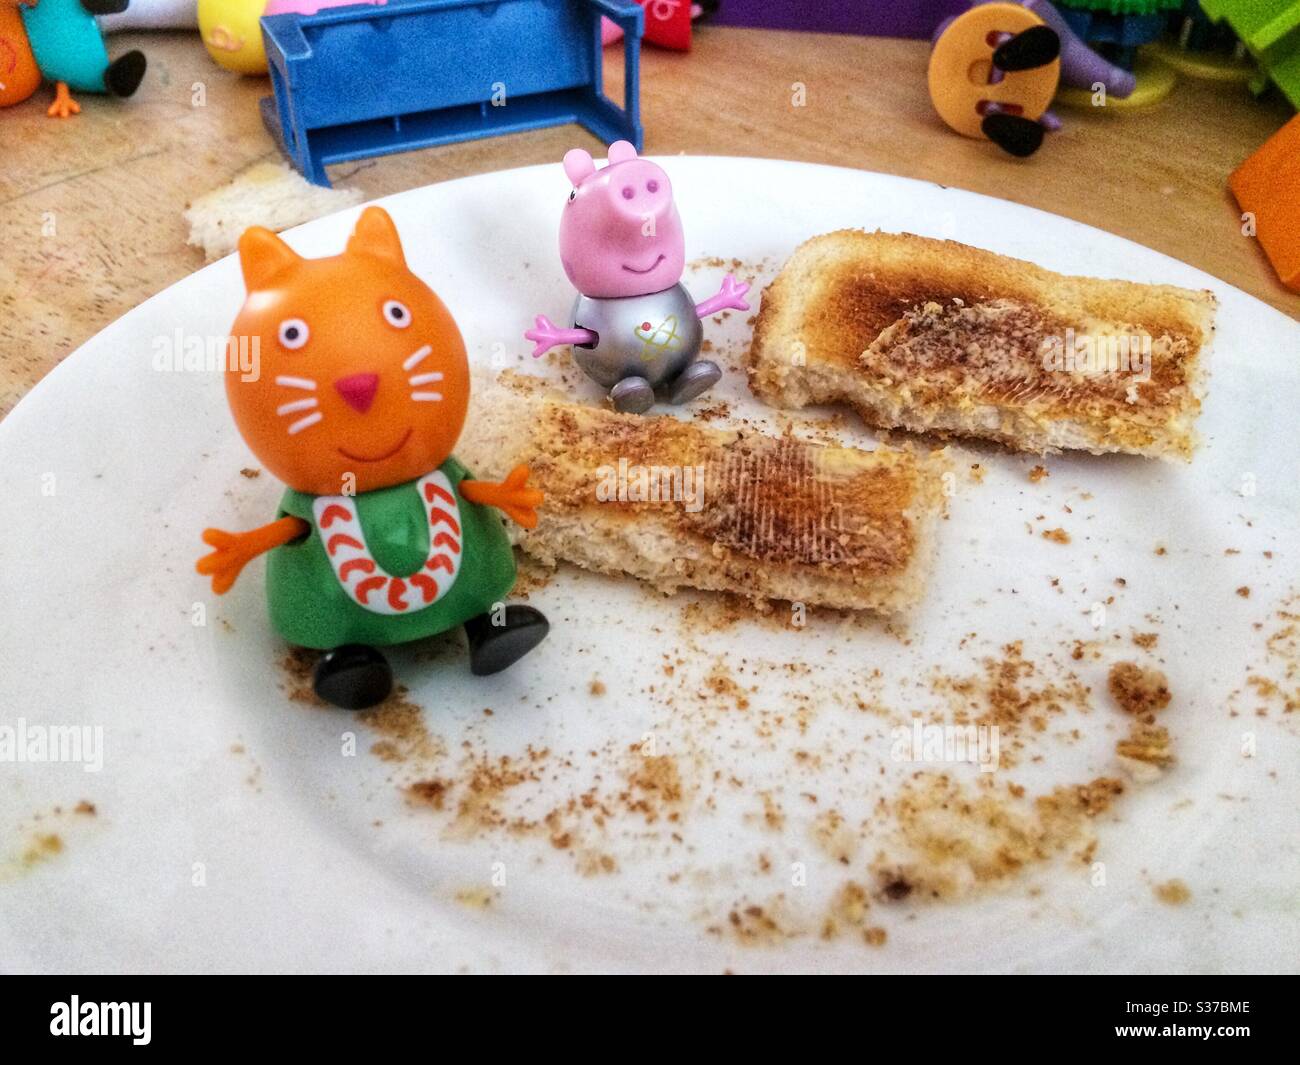 Peppa Pig and Candy Cat eating breakfast. Stock Photo